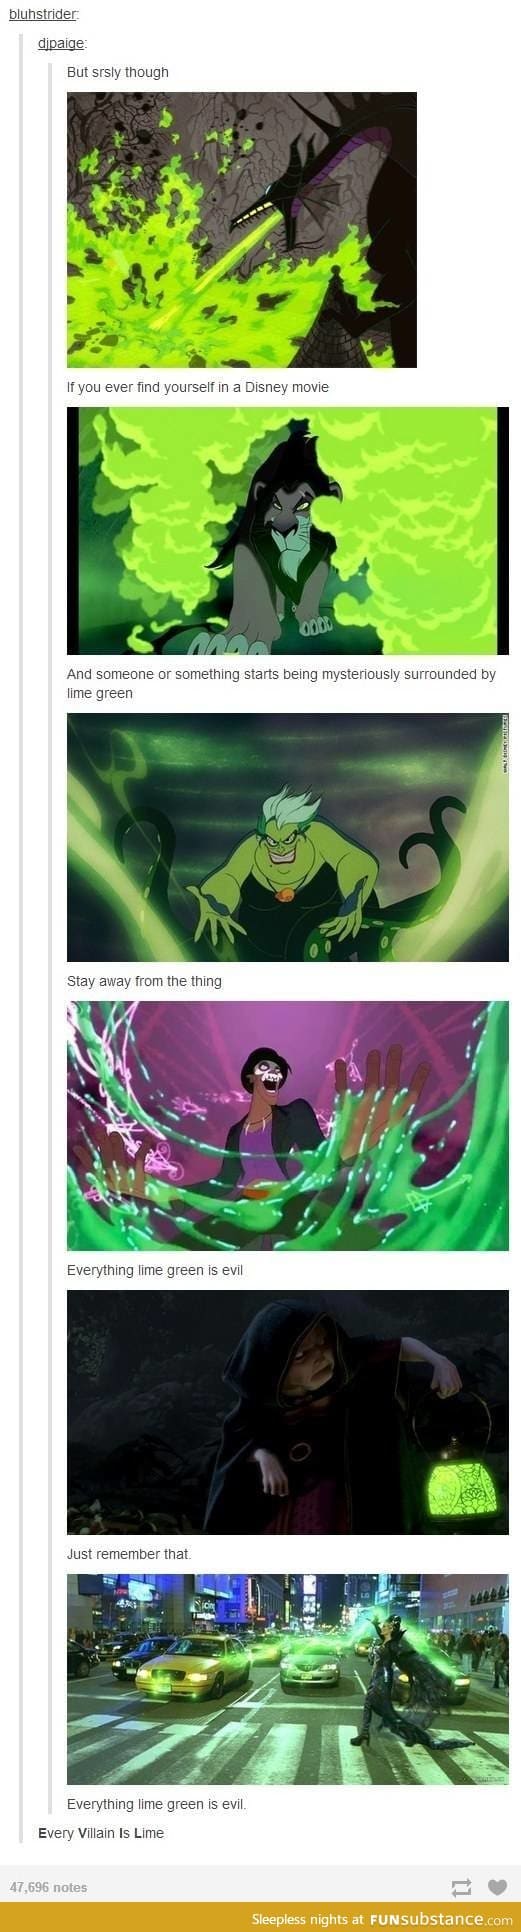 Every Villain Is Lime